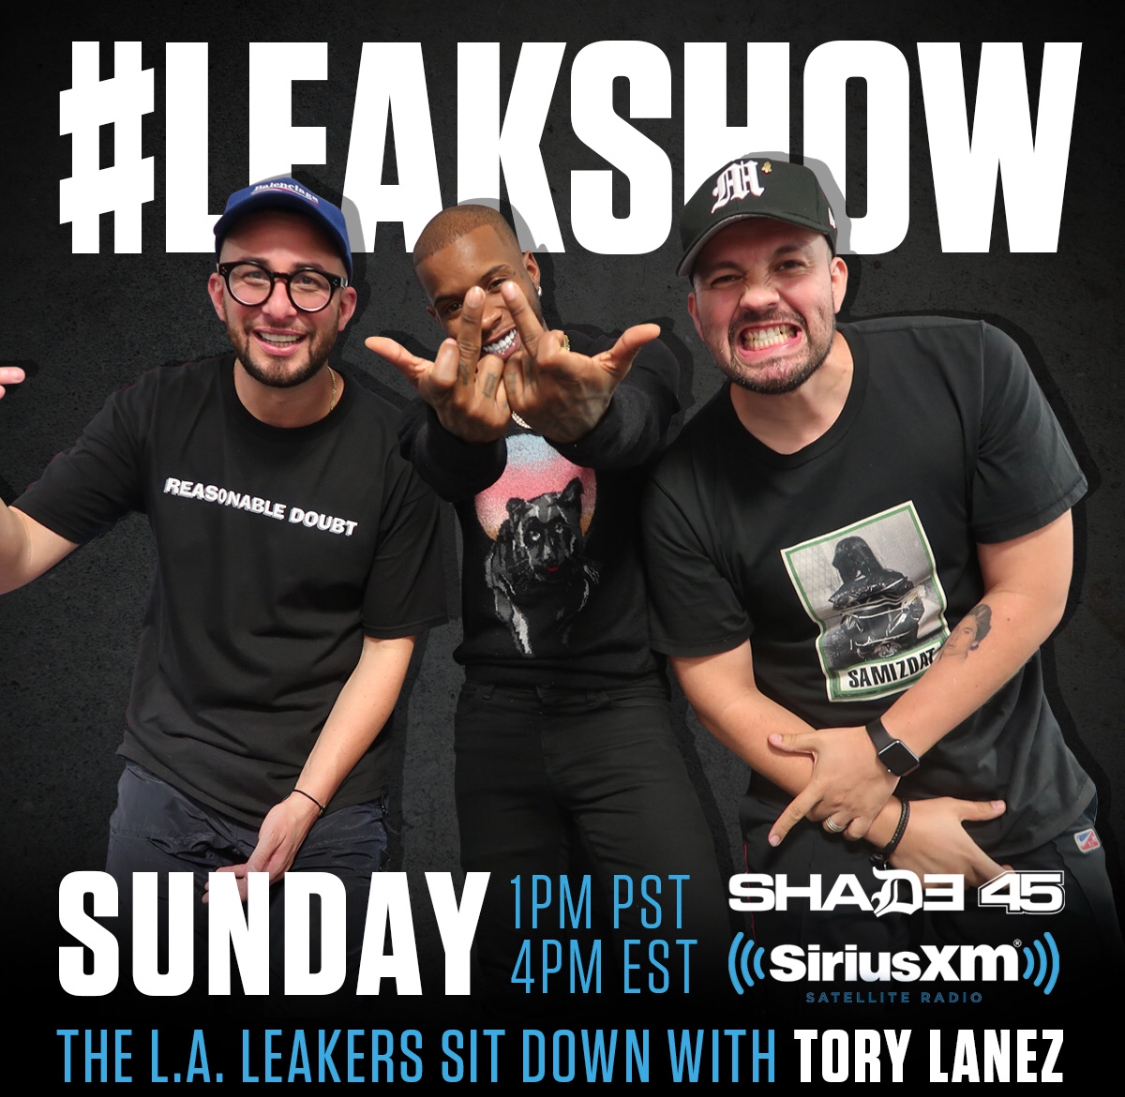 Check Out The Playlist From Yesterday’s #LEAKSHOW On Shade 45 [PEEP]